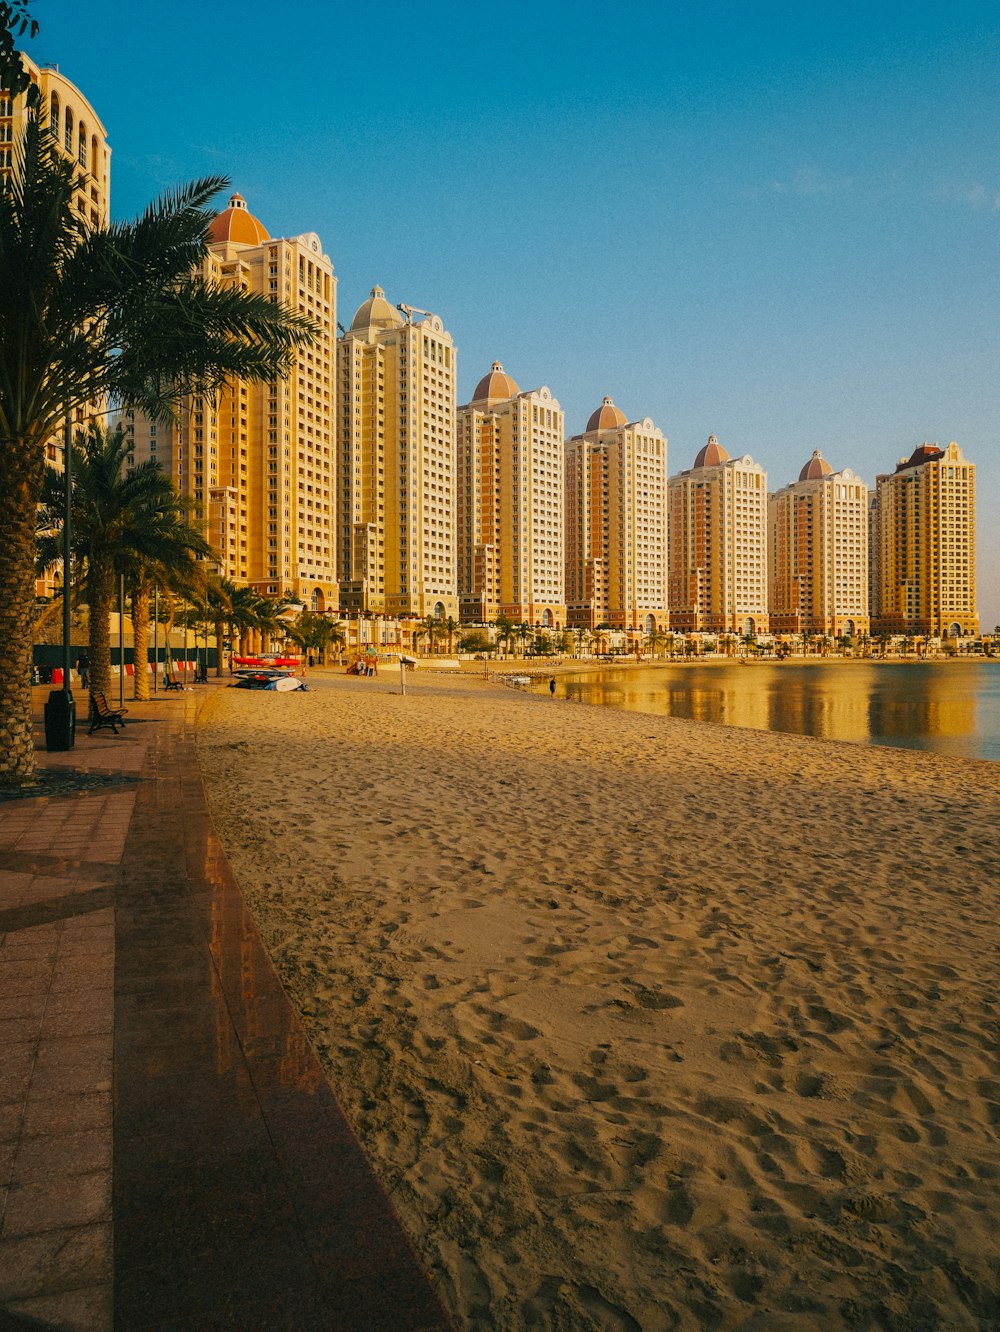 a sandy beach next to tall buildings and palm trees